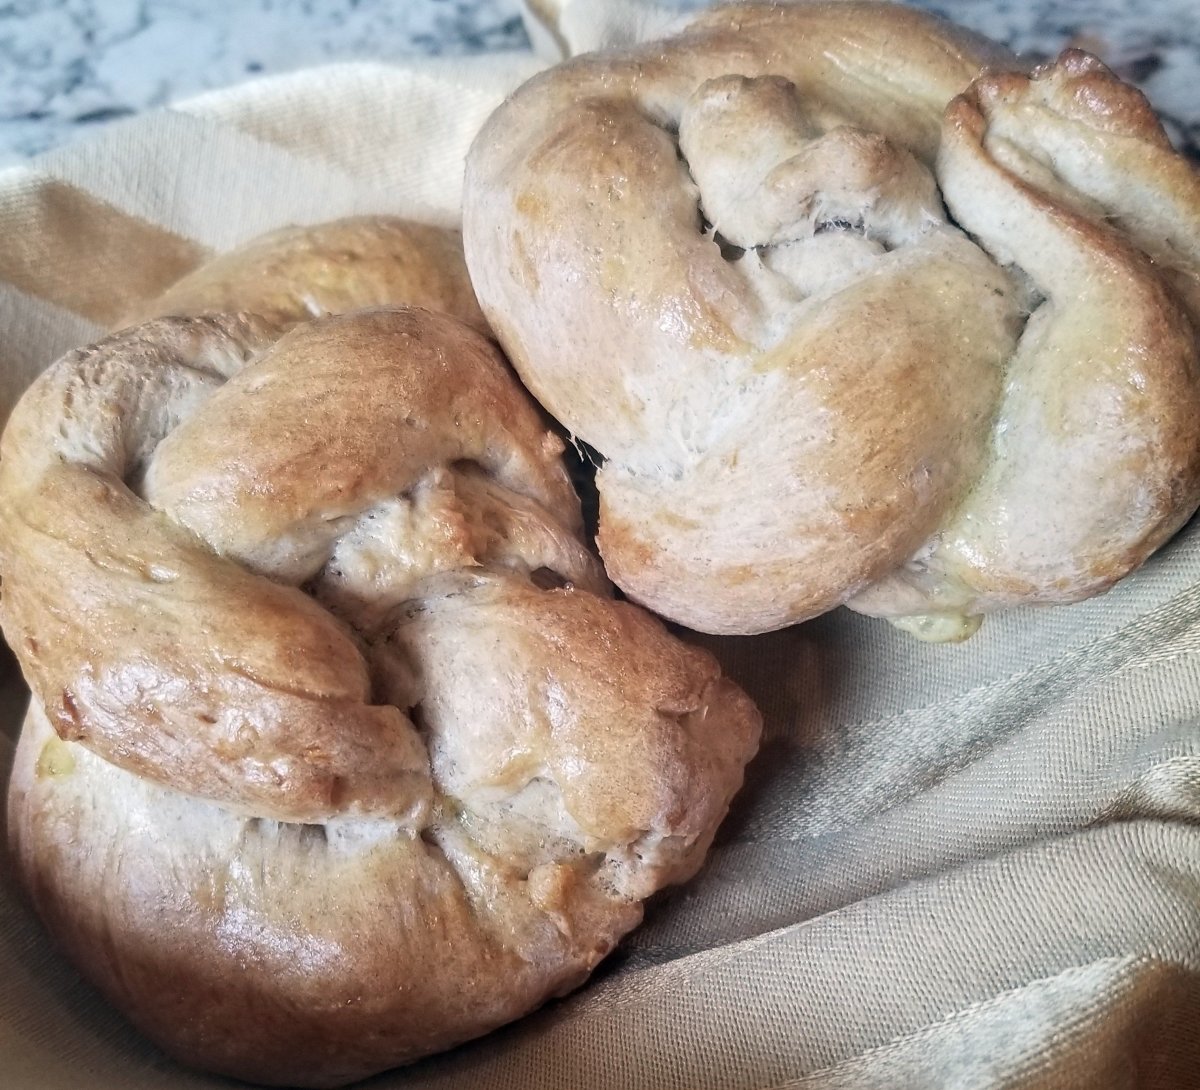 These half and half rolls are shaped using the doubt knot method, but you can also just roll the dough into simple balls. They taste just as good!